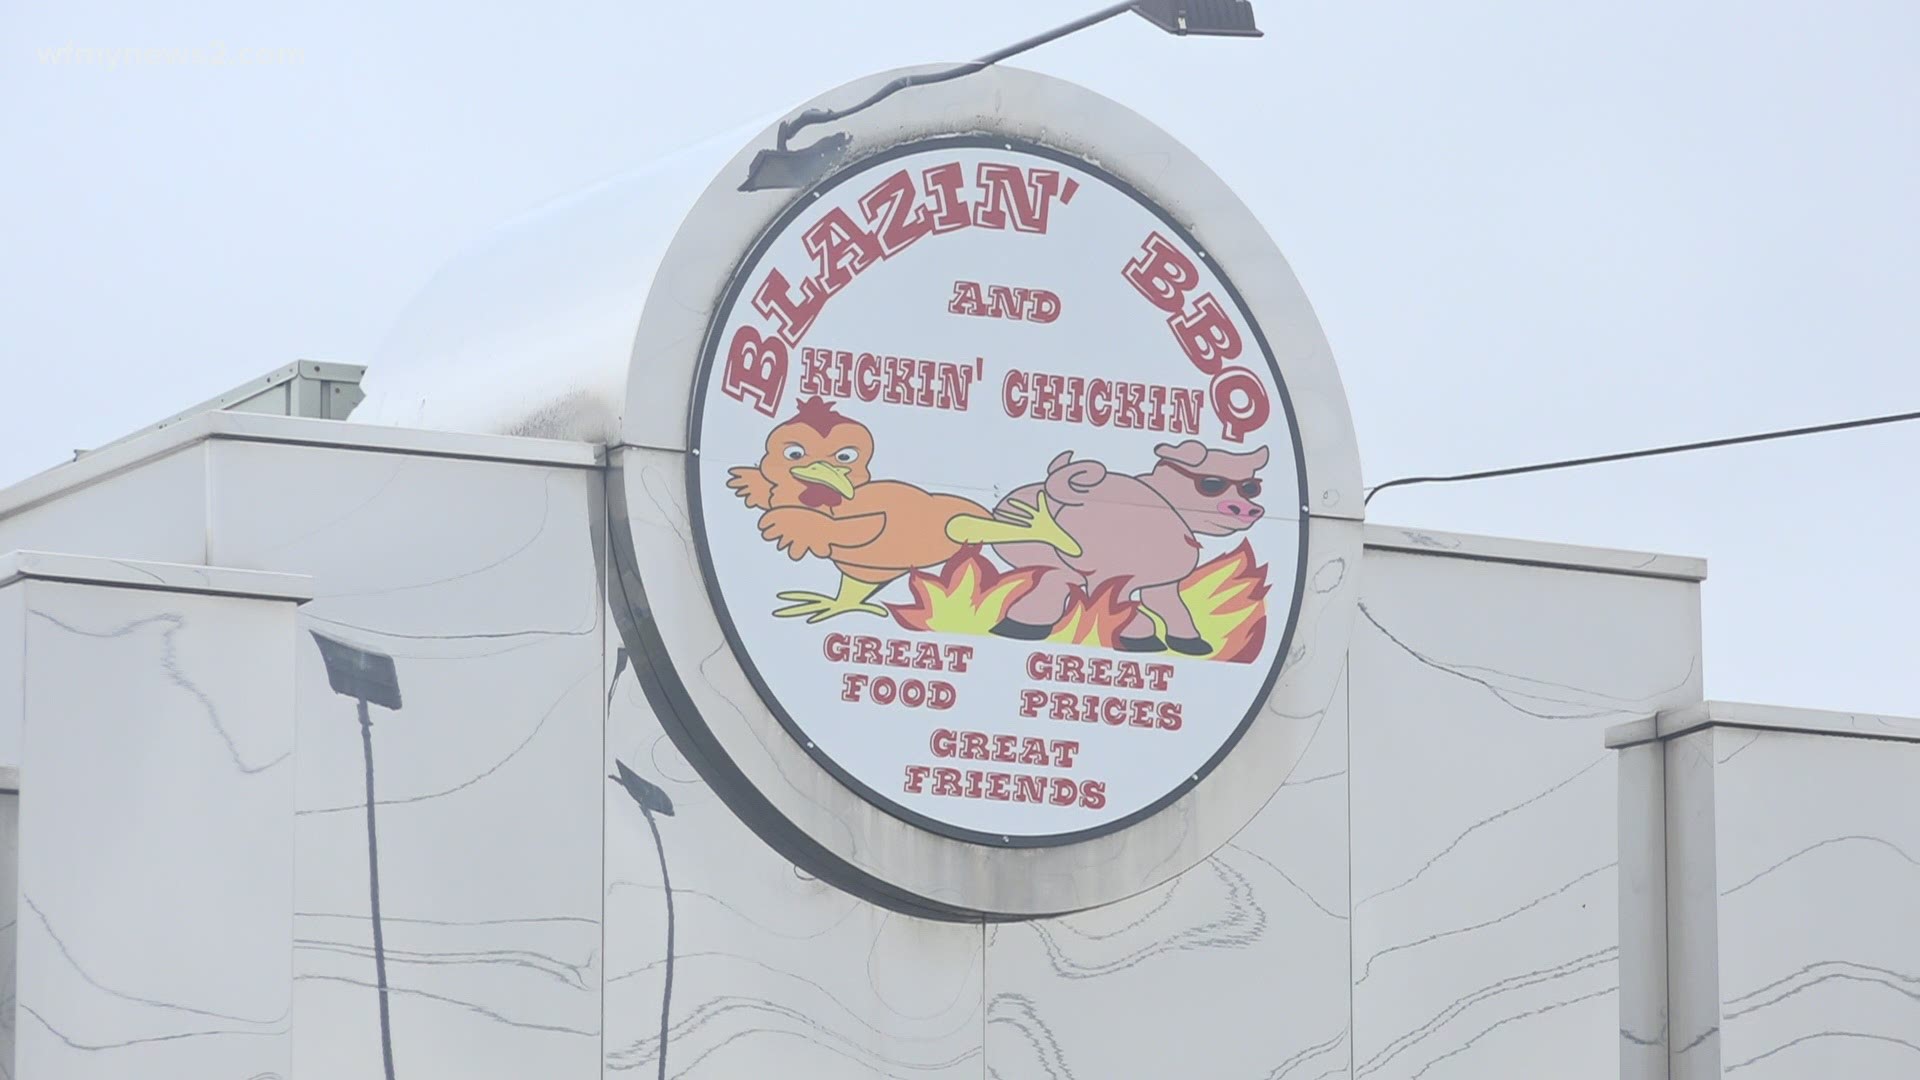 The Lexington community was excited to see Blazin Barbeque and Kickin' Chicken open, but owners couldn’t staff the kitchen so it had to close.